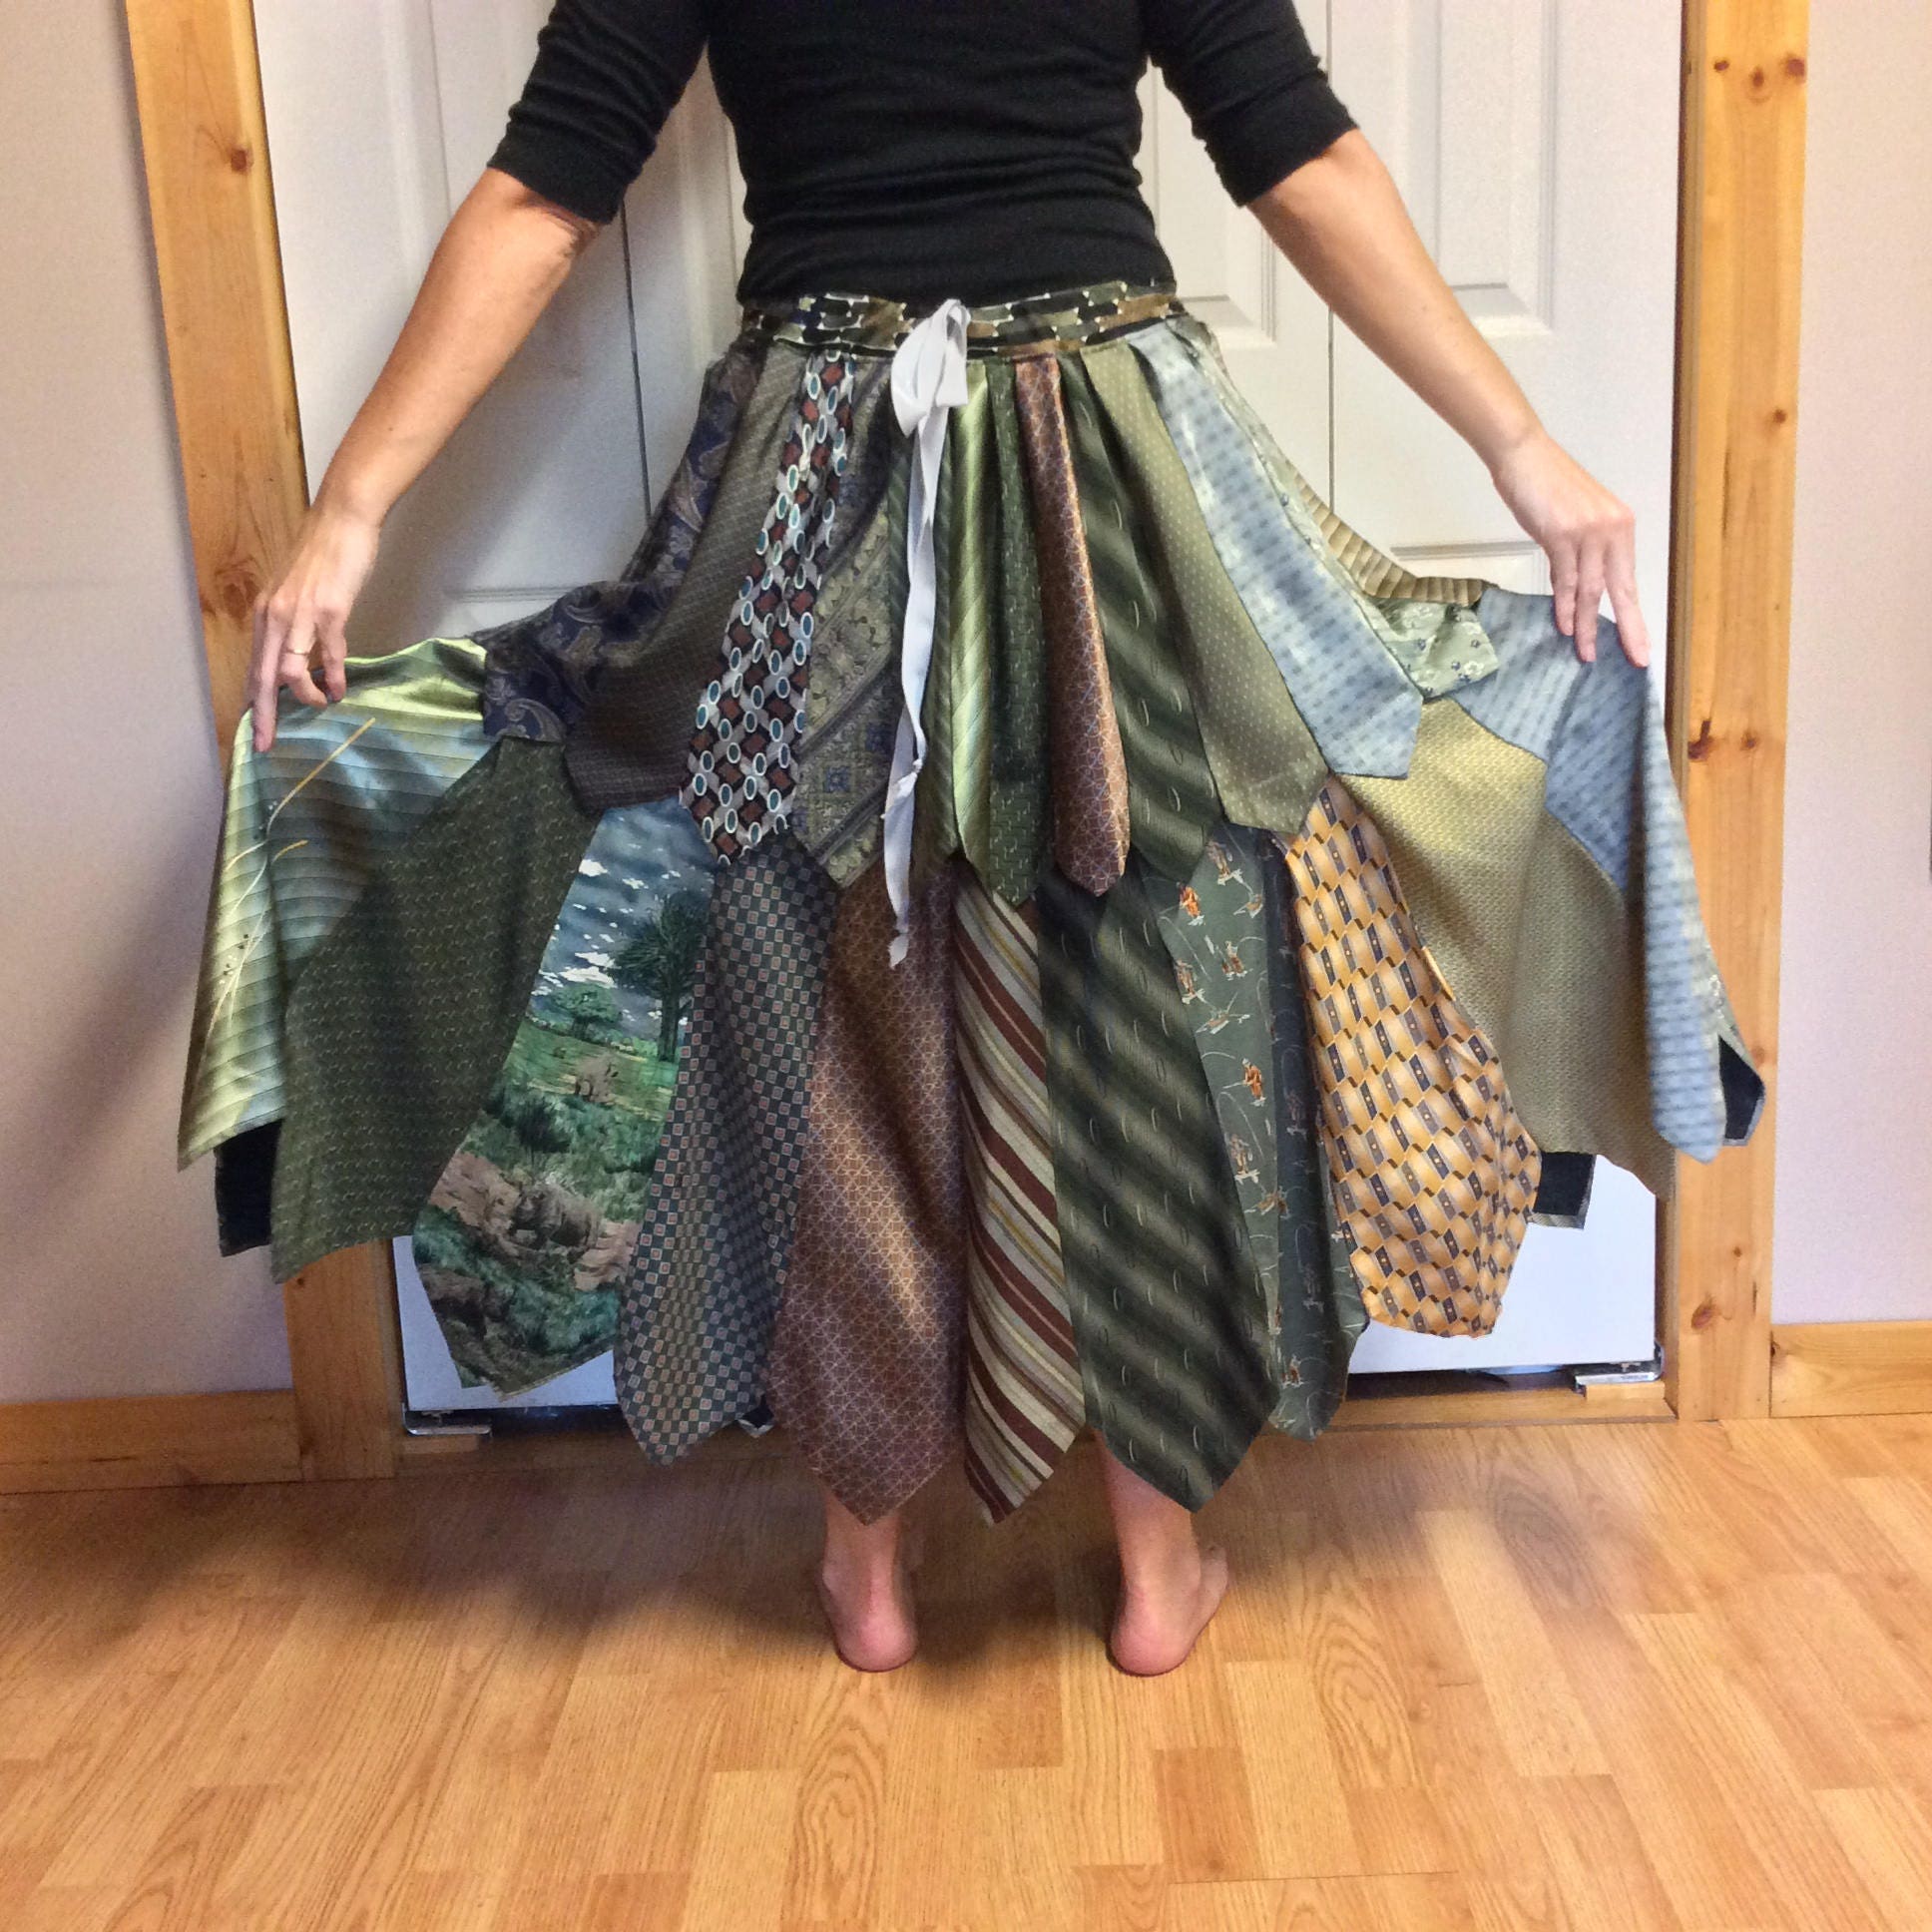 Long Layered Bustle Skirt/Silk Maxi Skirt/Recycled Neckties | Etsy